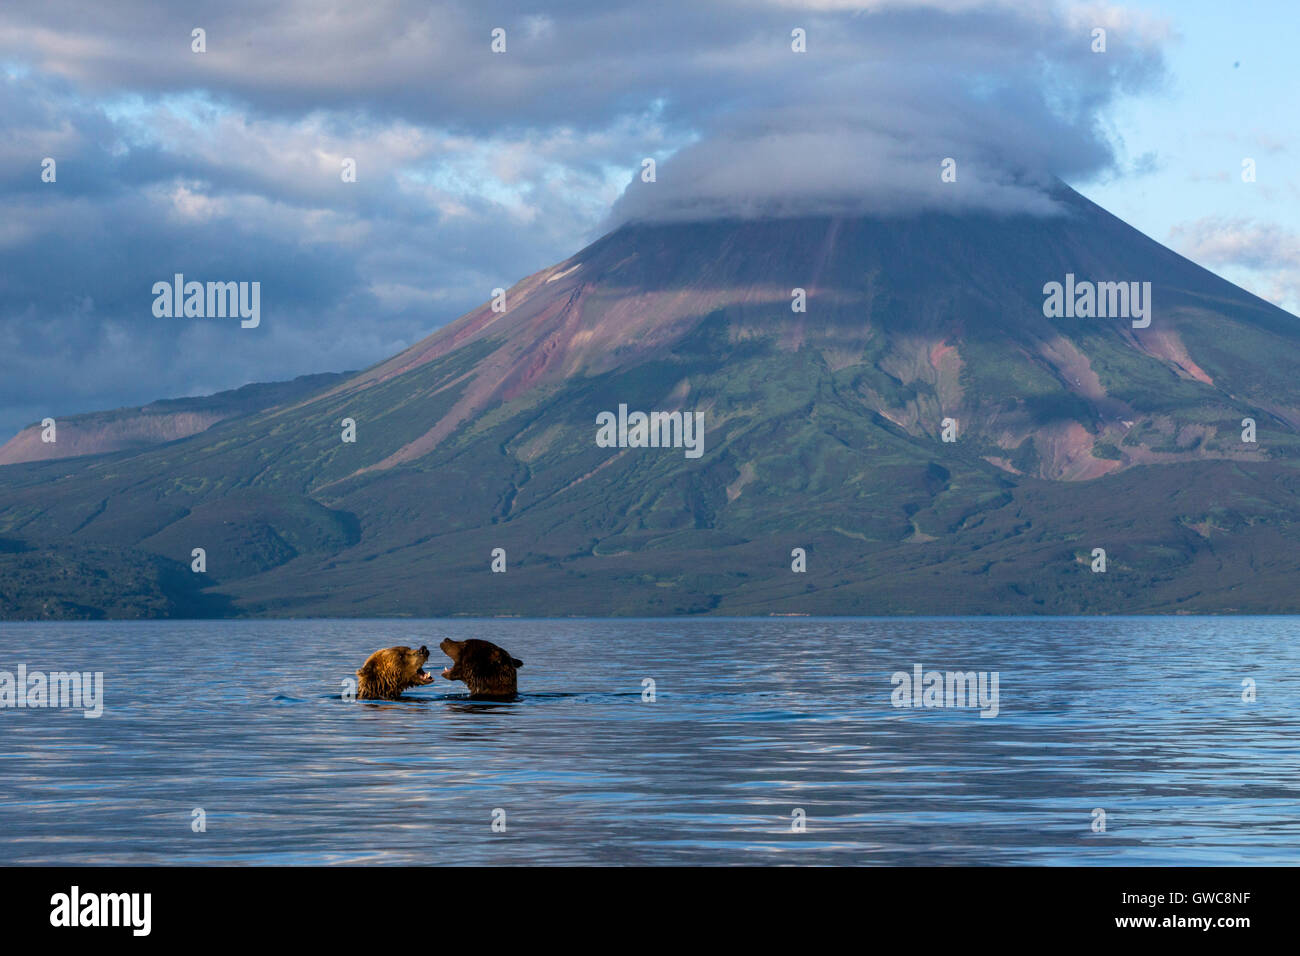 View of Kurile lake against the backdrop of the Ilyinsky volcano in Kamchatka region of Russia Stock Photo